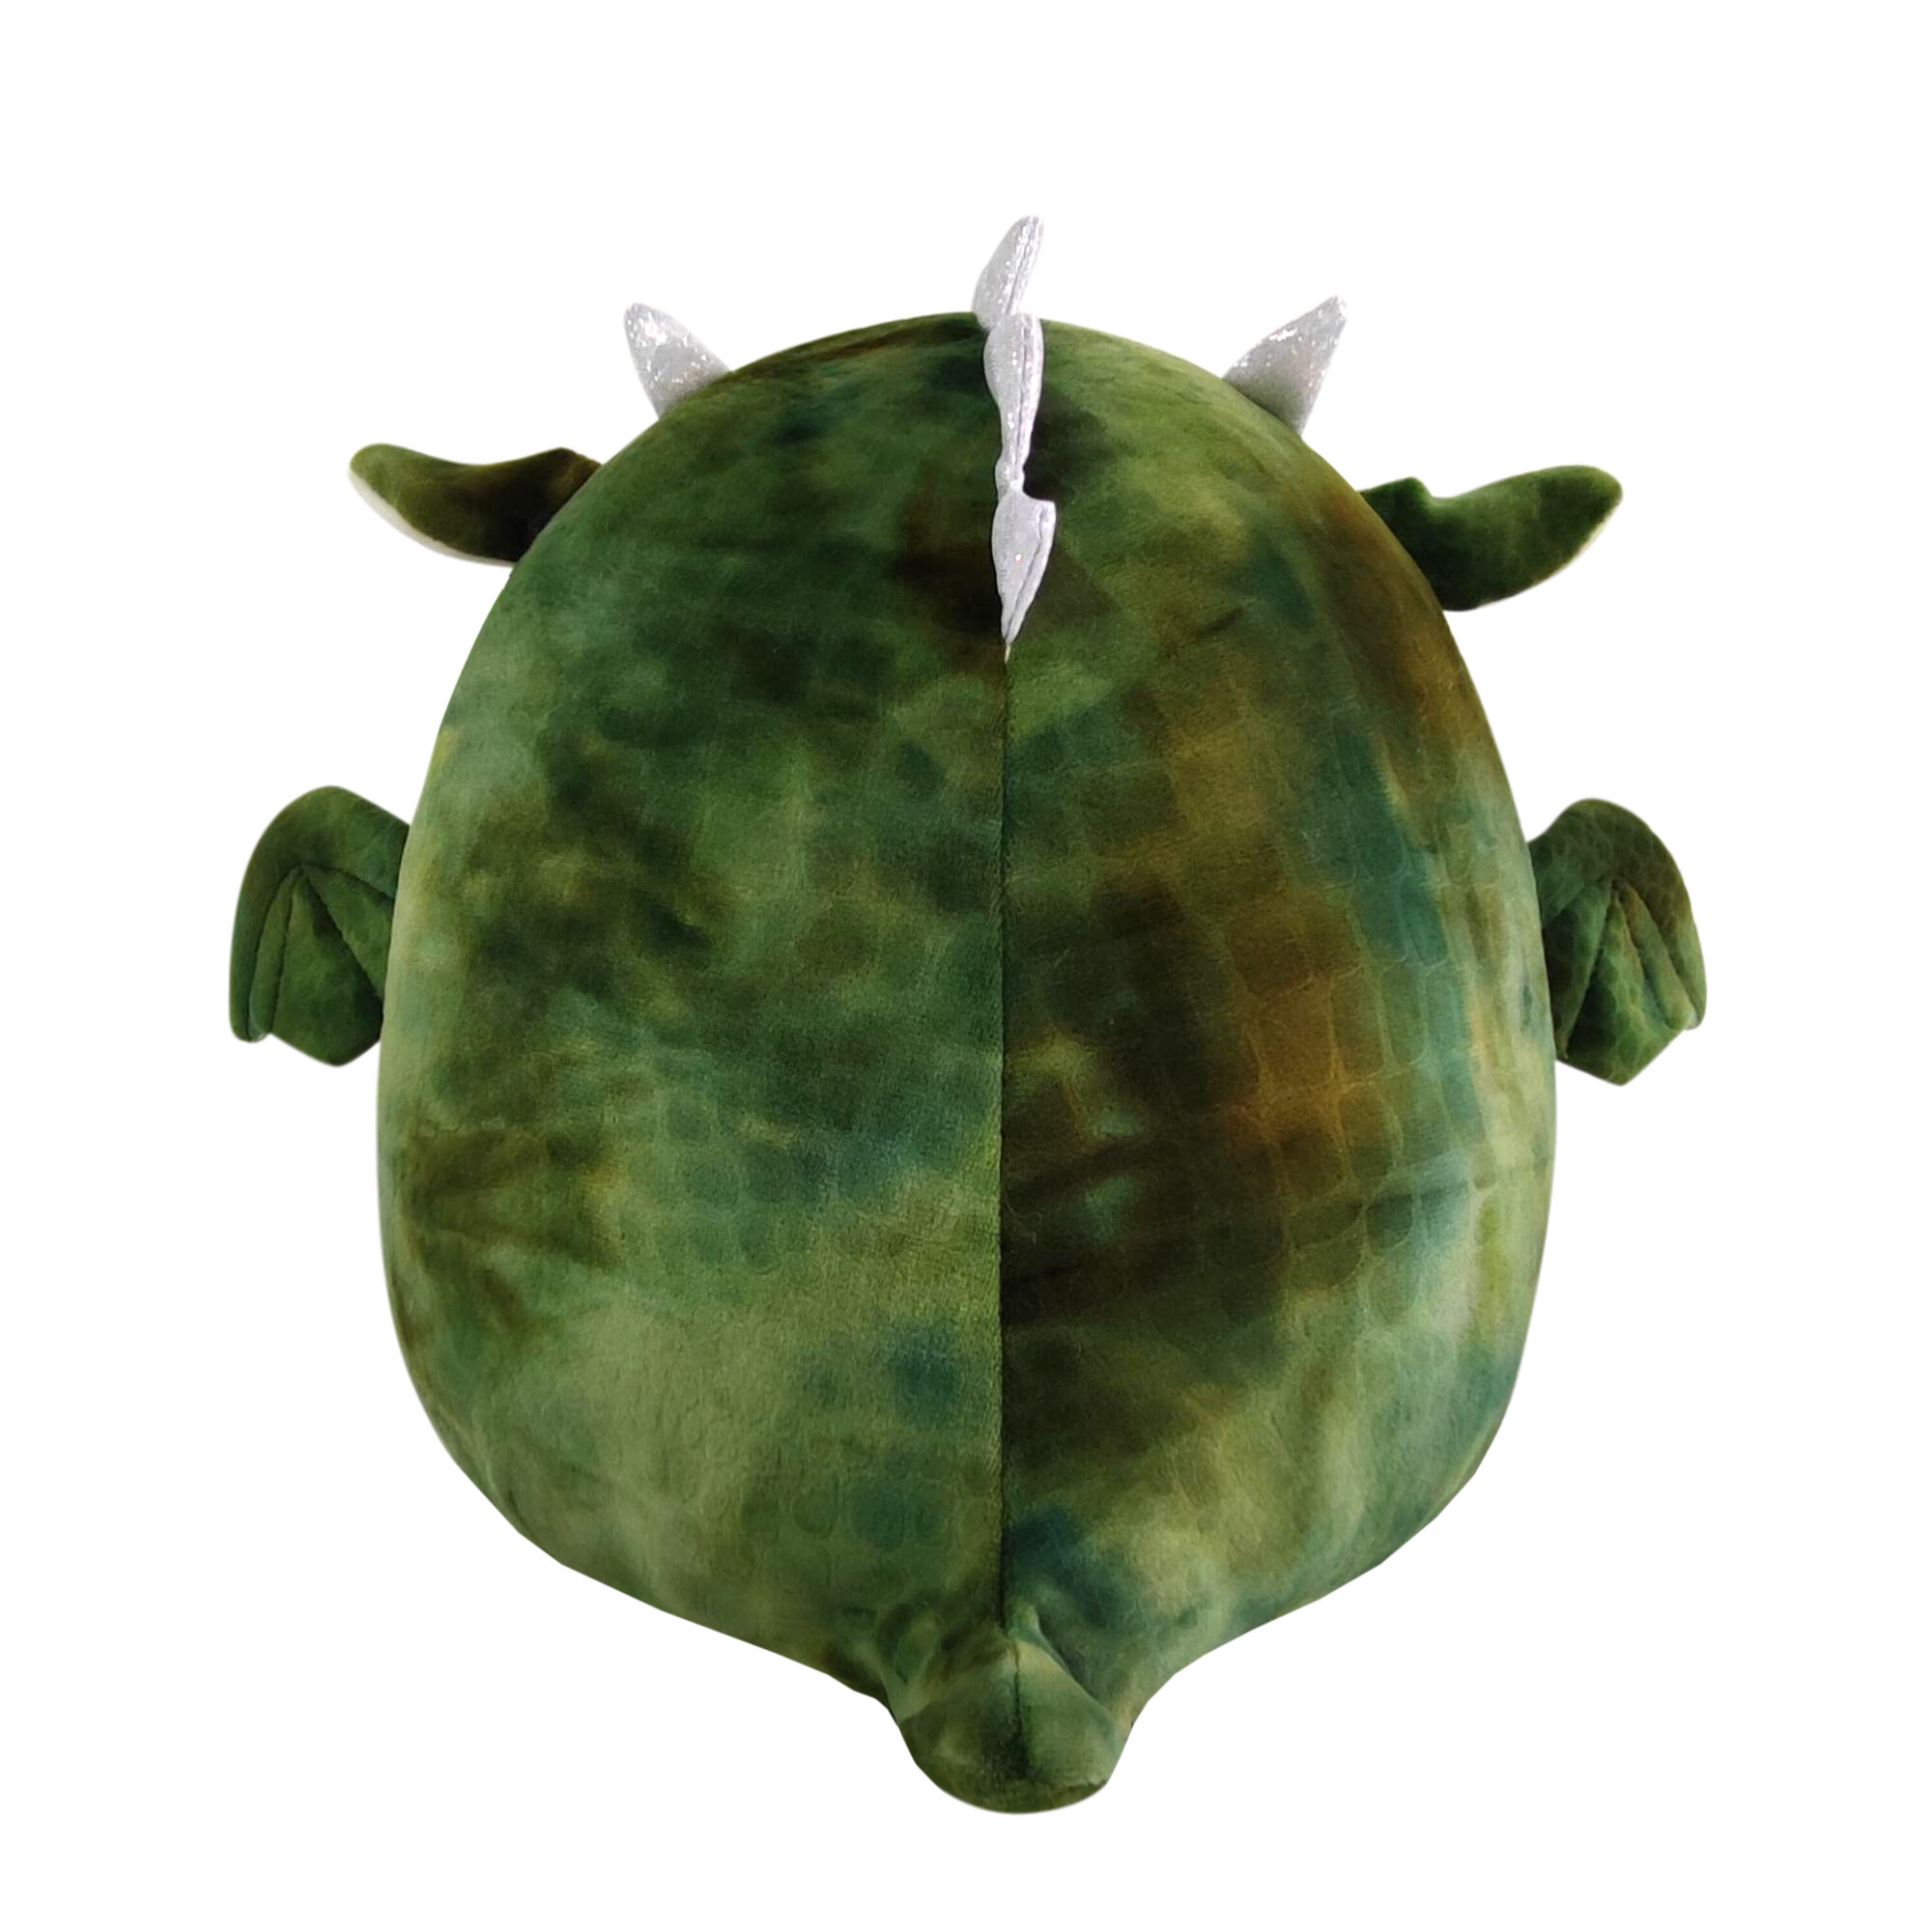 Squishmallows 10 inch Duke the Green Textured Dragon with Silver Horns - Child's Ultra Soft Stuffed Plush Toy - image 3 of 7